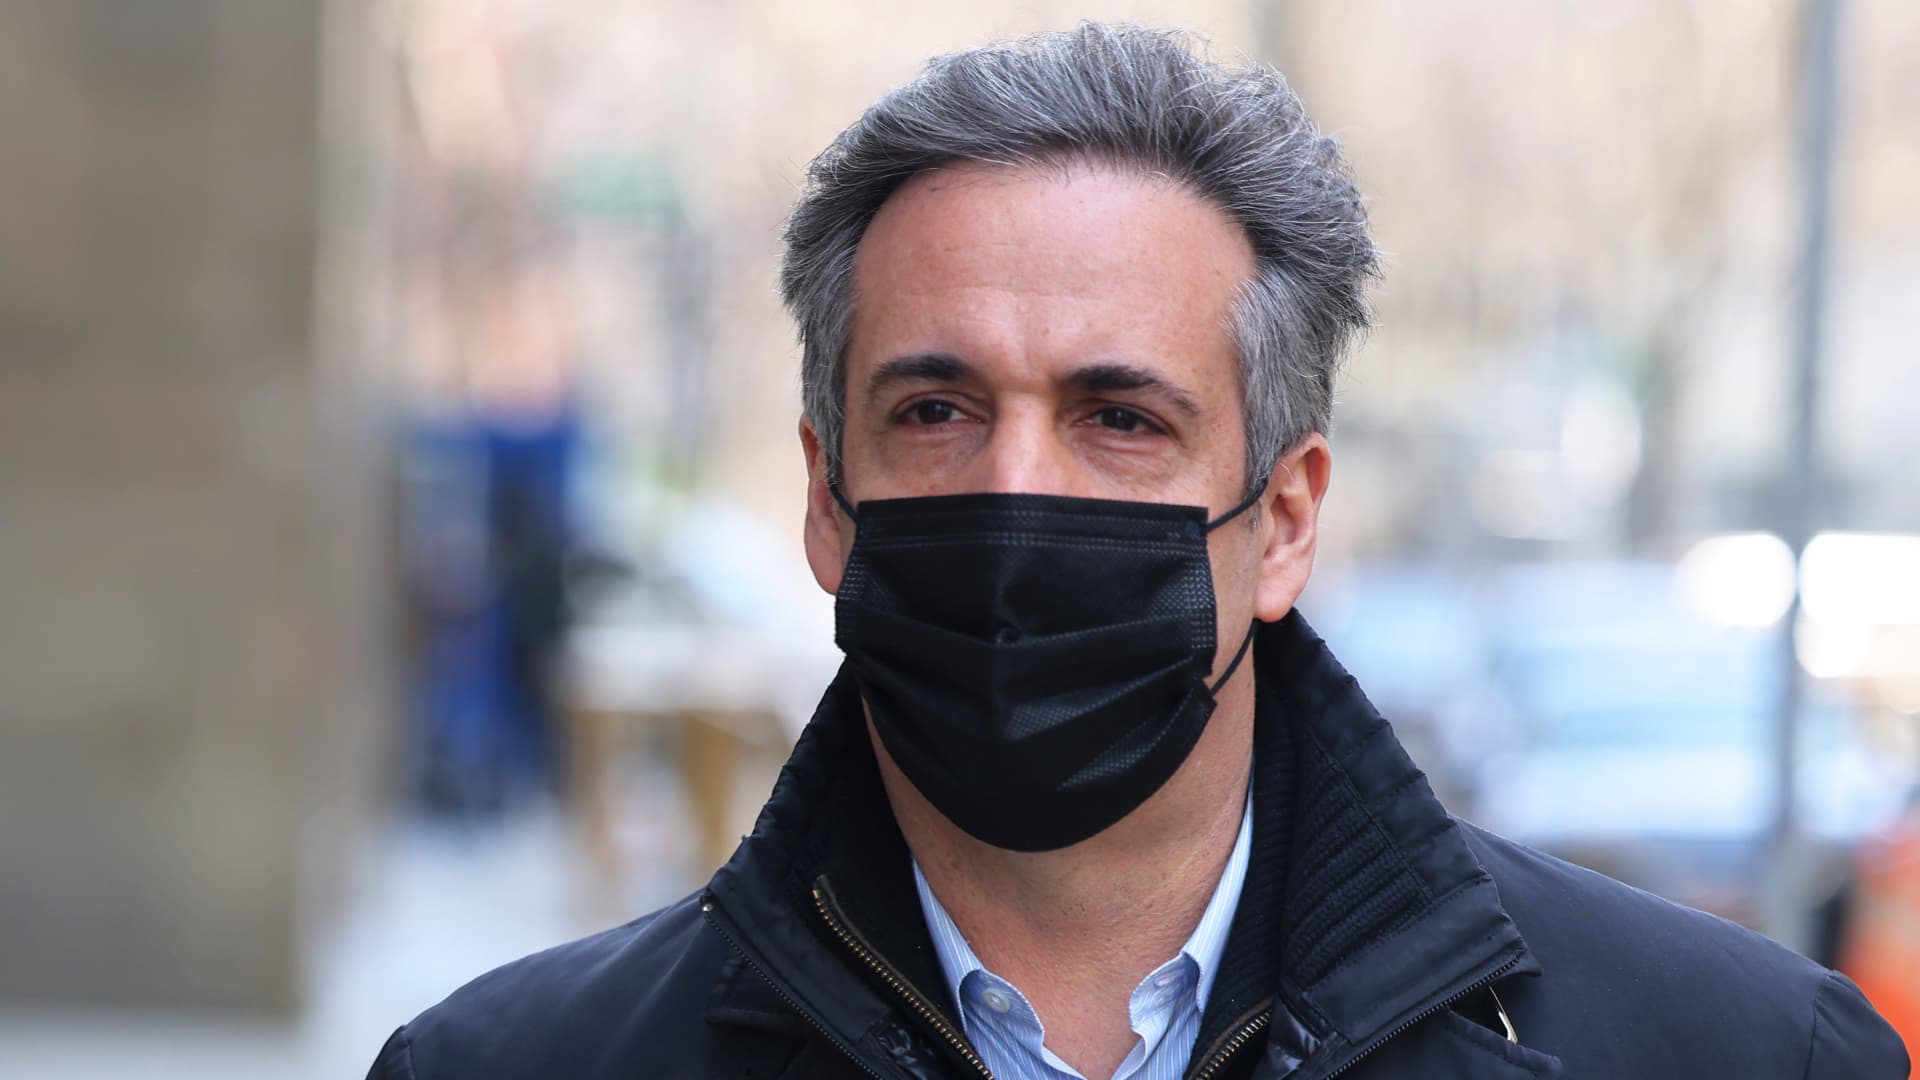 Michael Cohen walks after leaving the Manhattan district attorney’s office on March 19, 2021 in New York City.